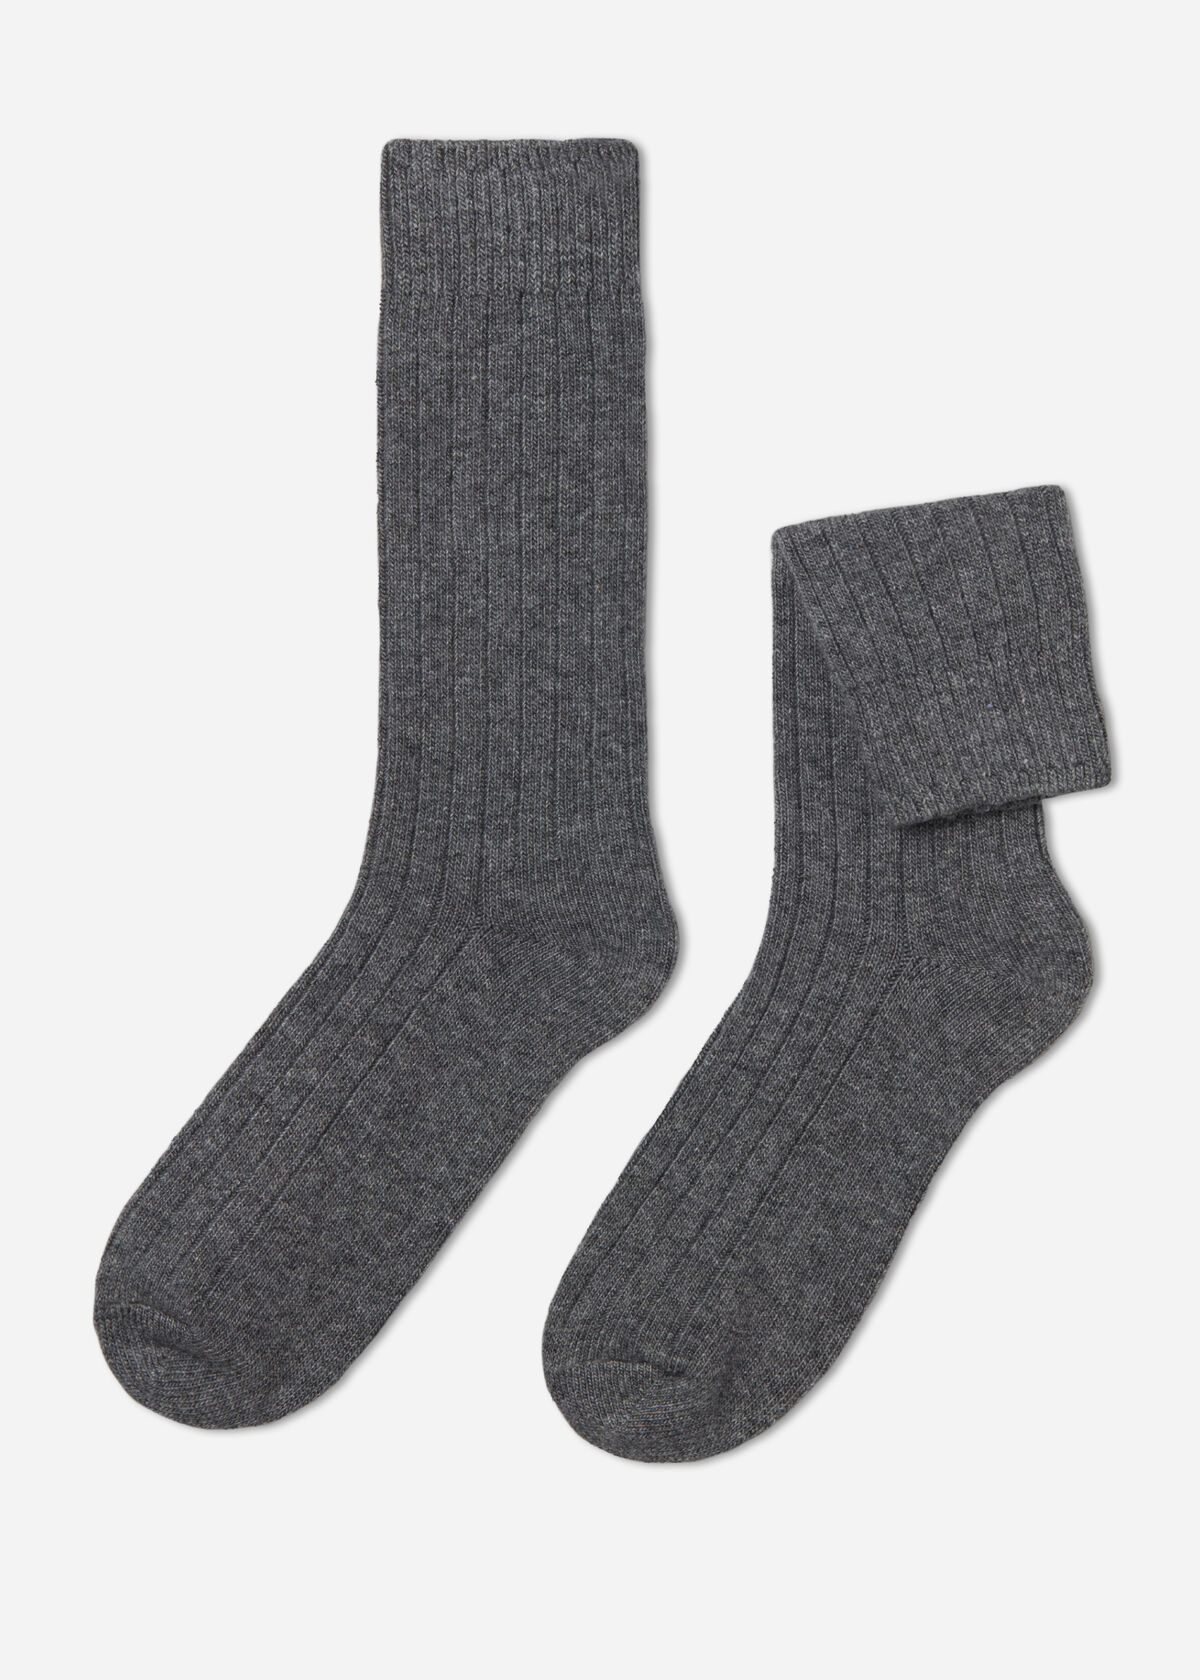 Men’s Ribbed Crew Socks with Wool and Cashmere - Crew socks - Calzedonia